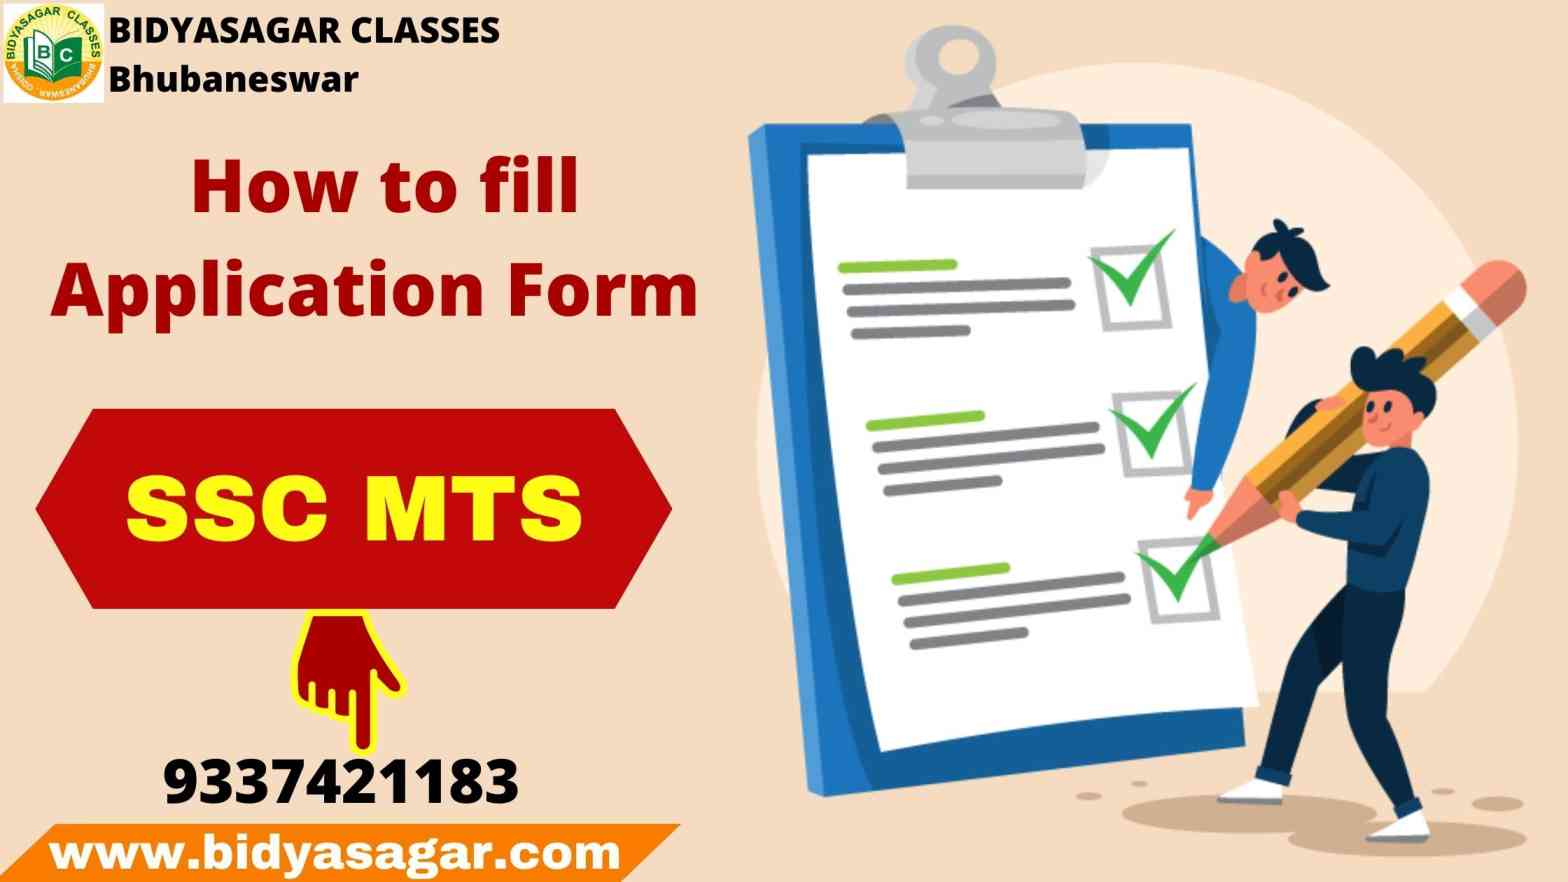 How to Fill SSC MTS Application Form 2020-21?